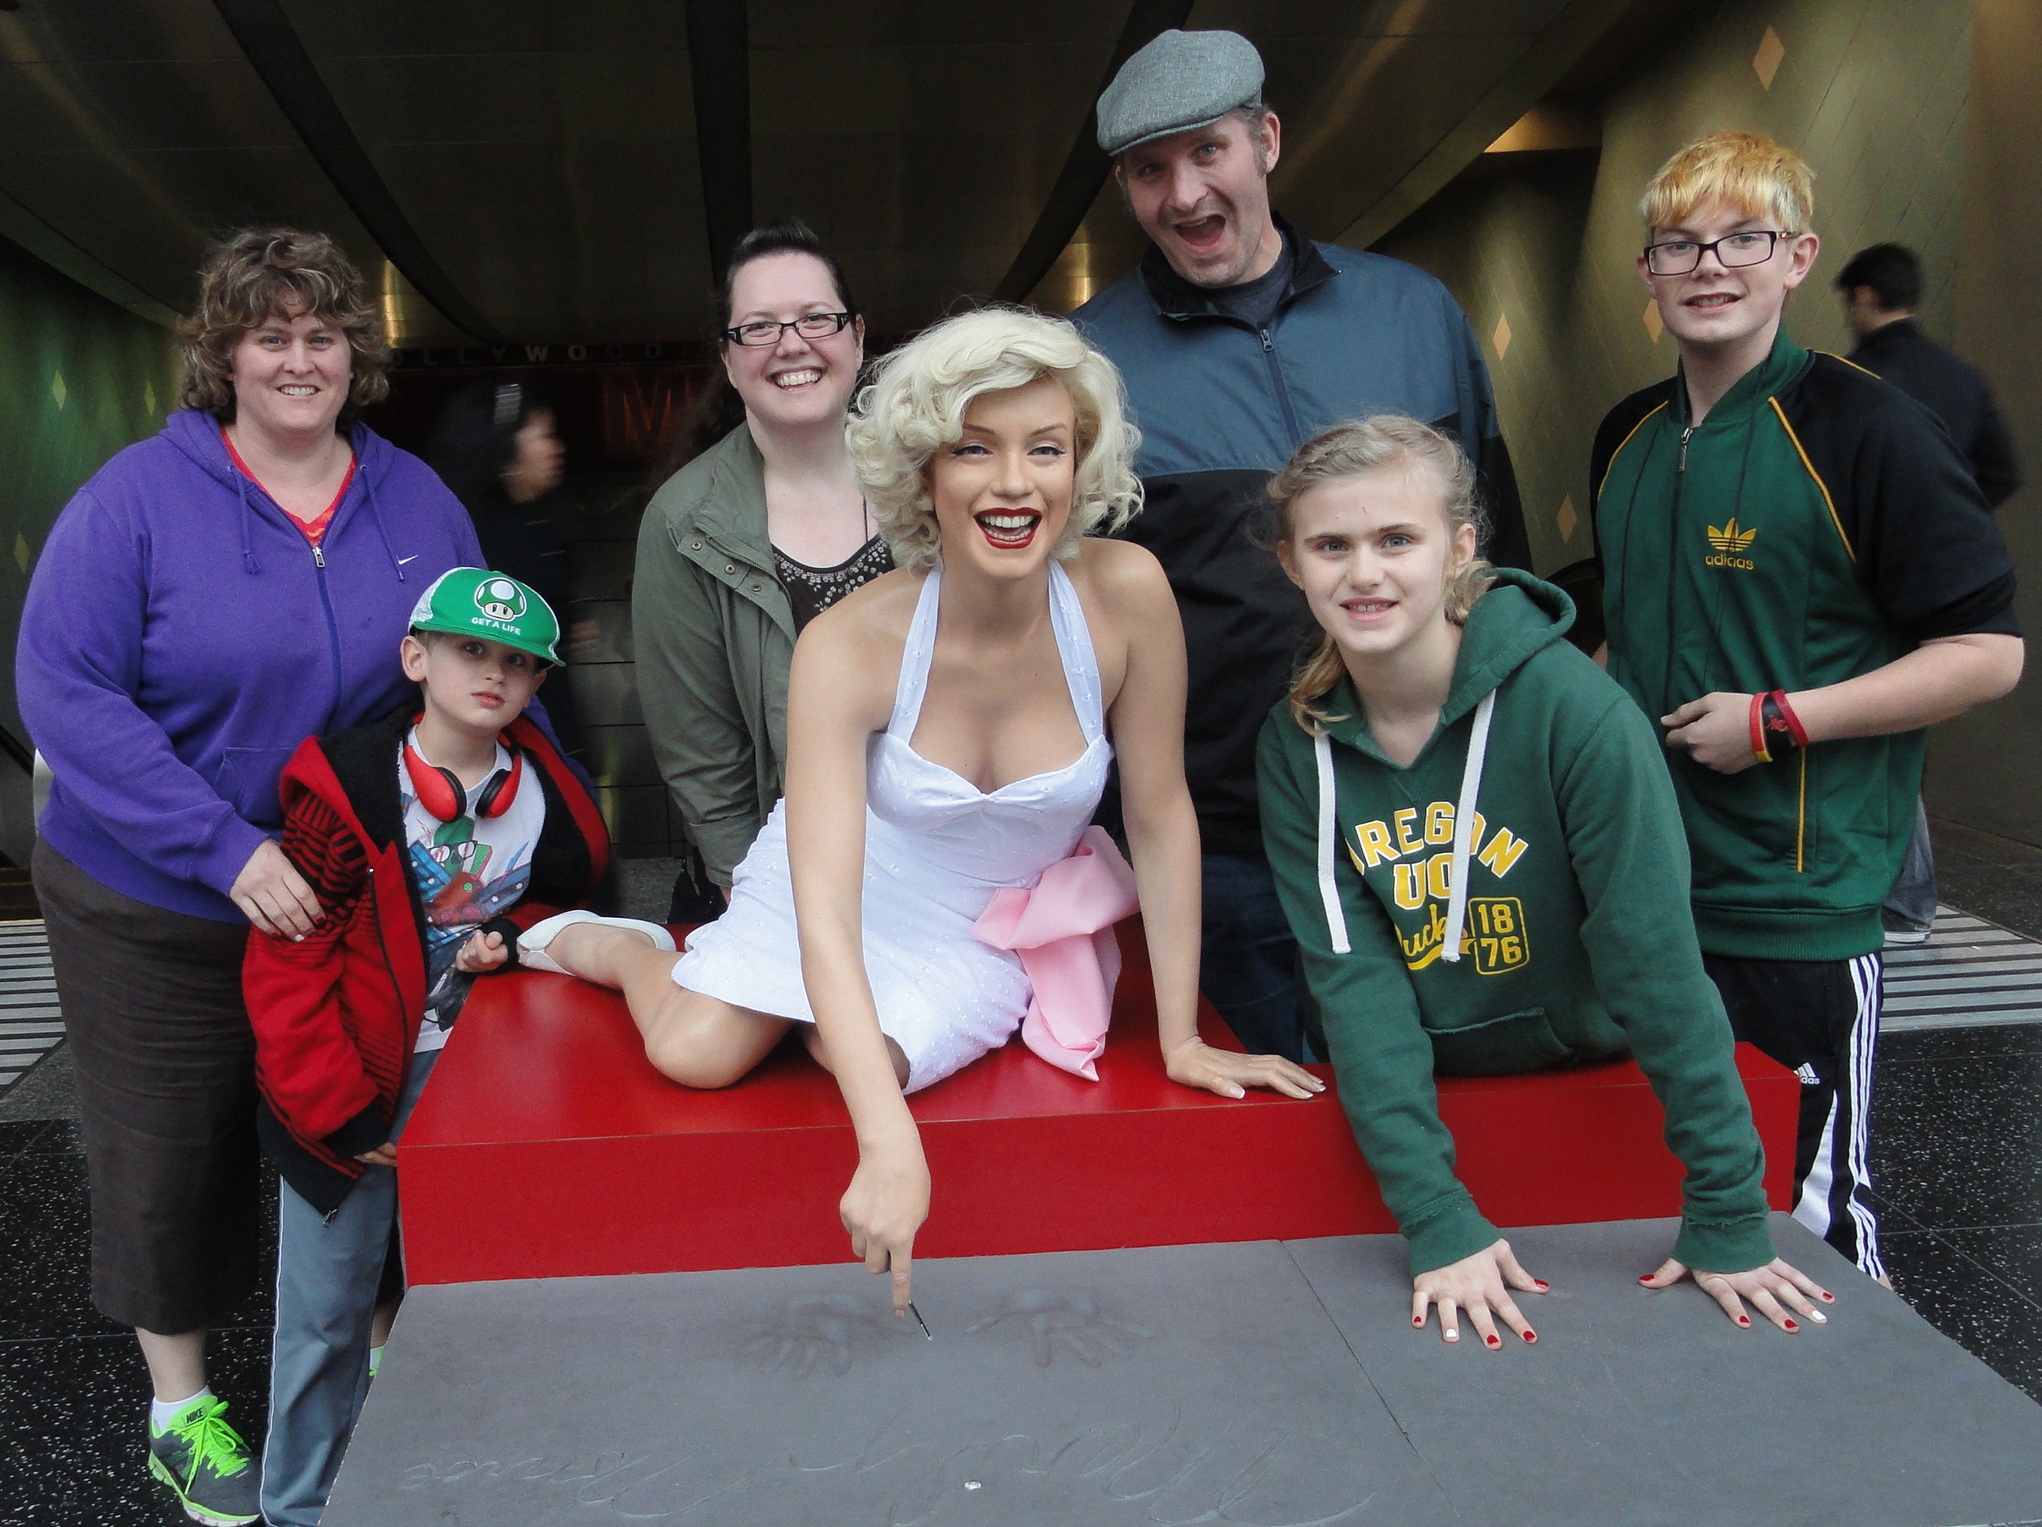 All of Us in Hollywood with Marilyn Monroe